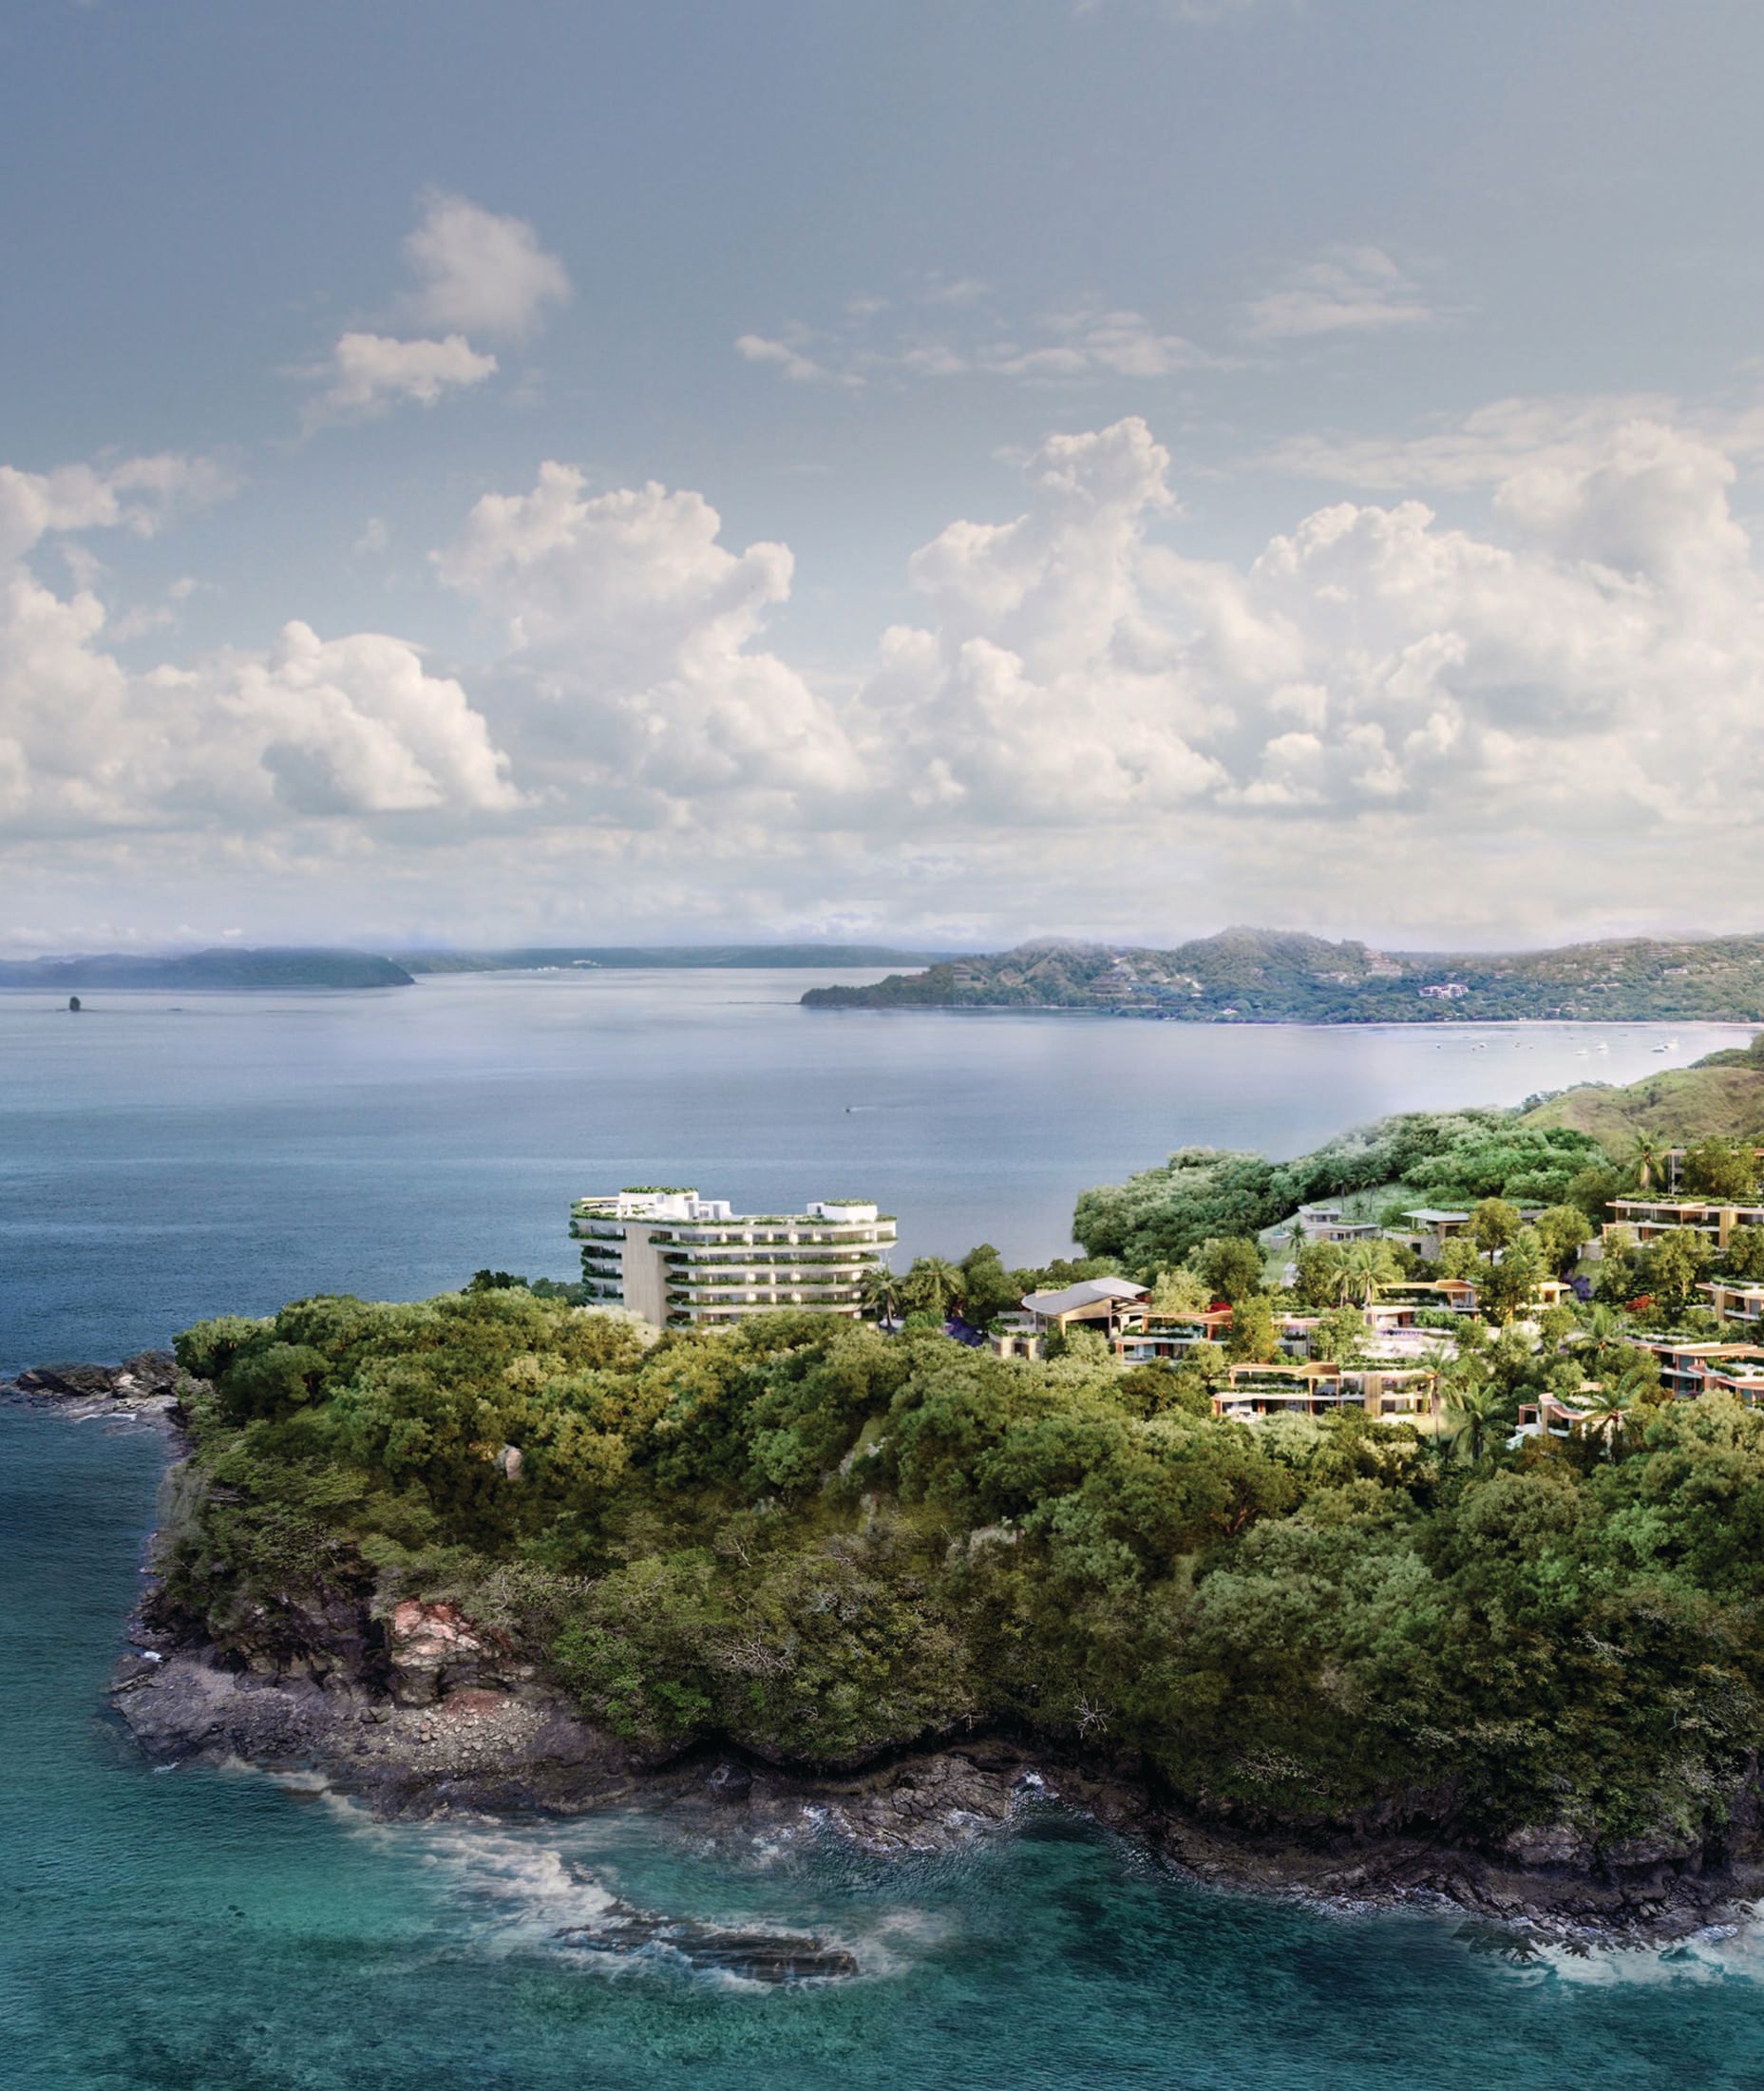 With just 19 condos and 22 estate homes, Waldorf Astoria Residences Guanacaste offers true exclusivity on Costa Rica’s stunning Cacique Peninsula. RENDERING COURTESY OF WALDORF ASTORIA RESIDENCES GUANACASTE